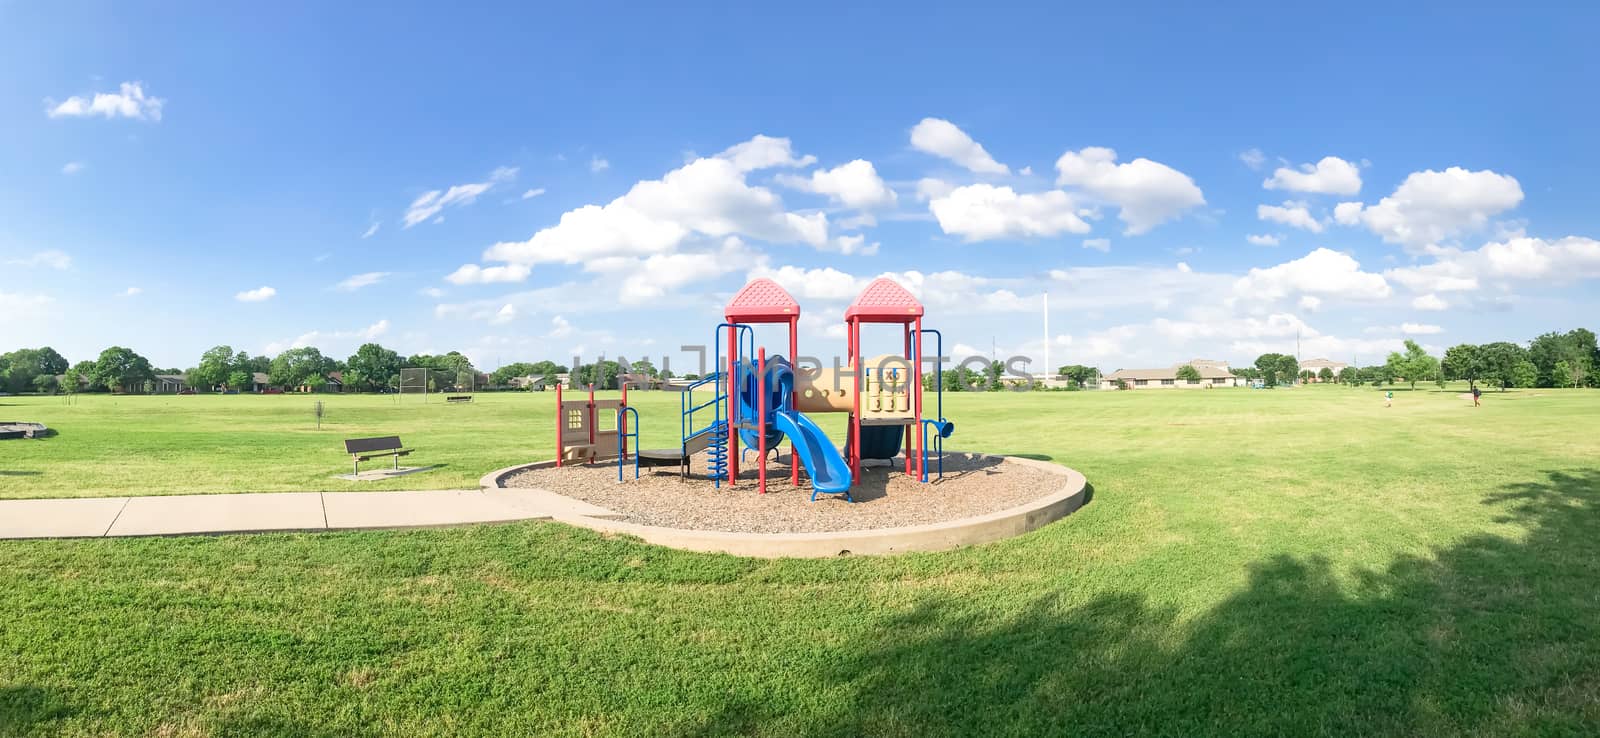 Panorama view colorful playground at public park in Texas, America with cloud blue sky on green grass lawn